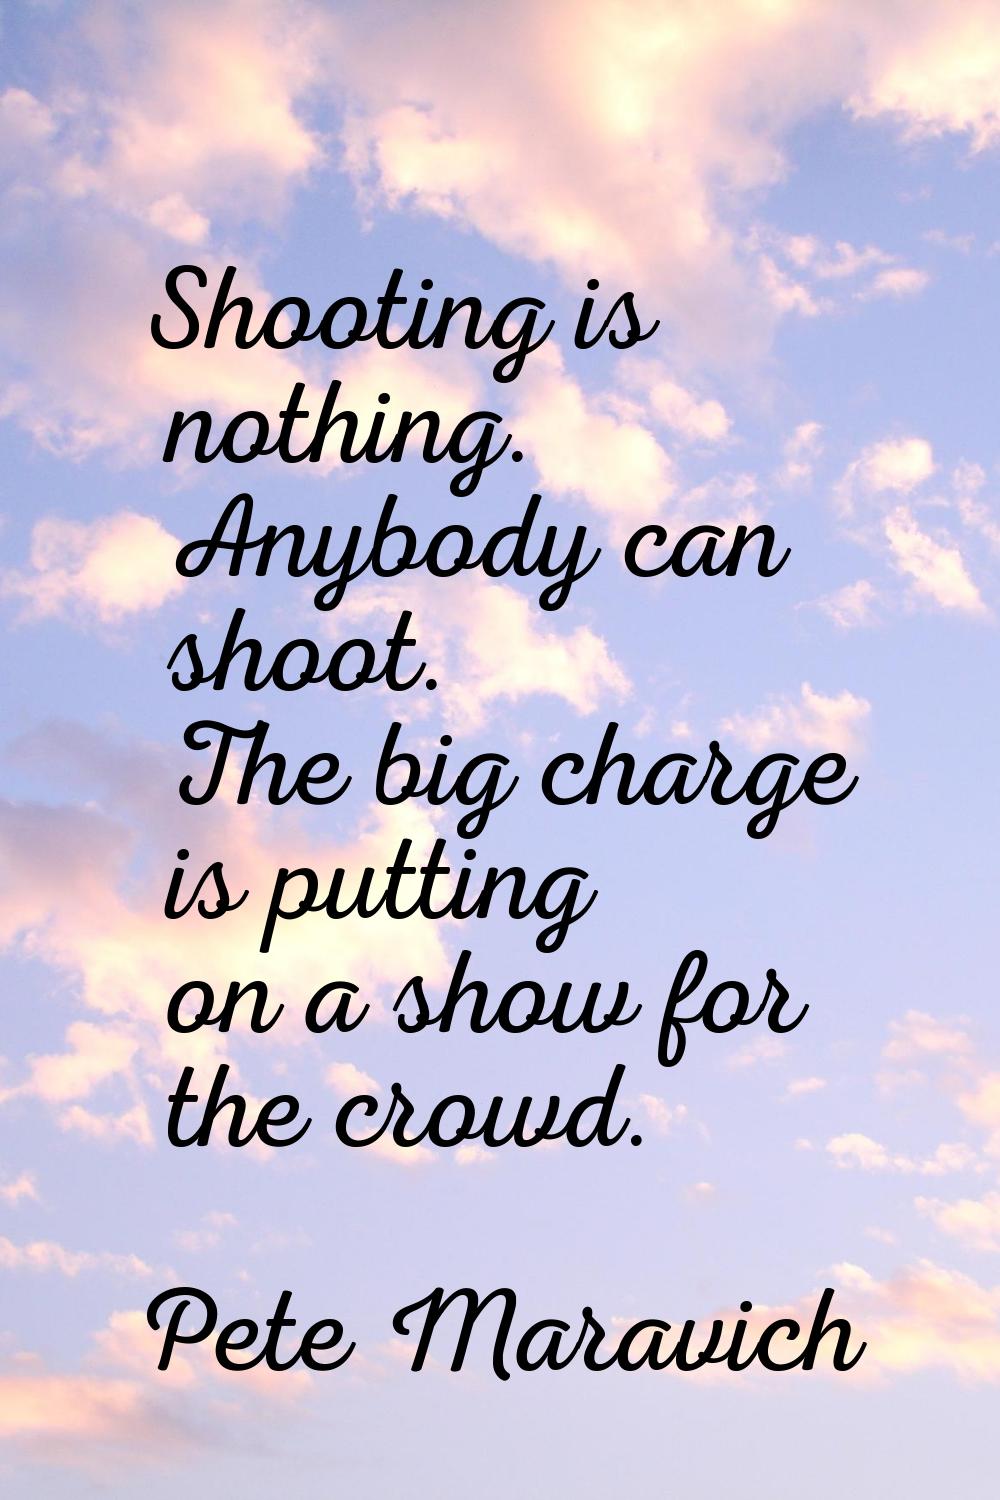 Shooting is nothing. Anybody can shoot. The big charge is putting on a show for the crowd.